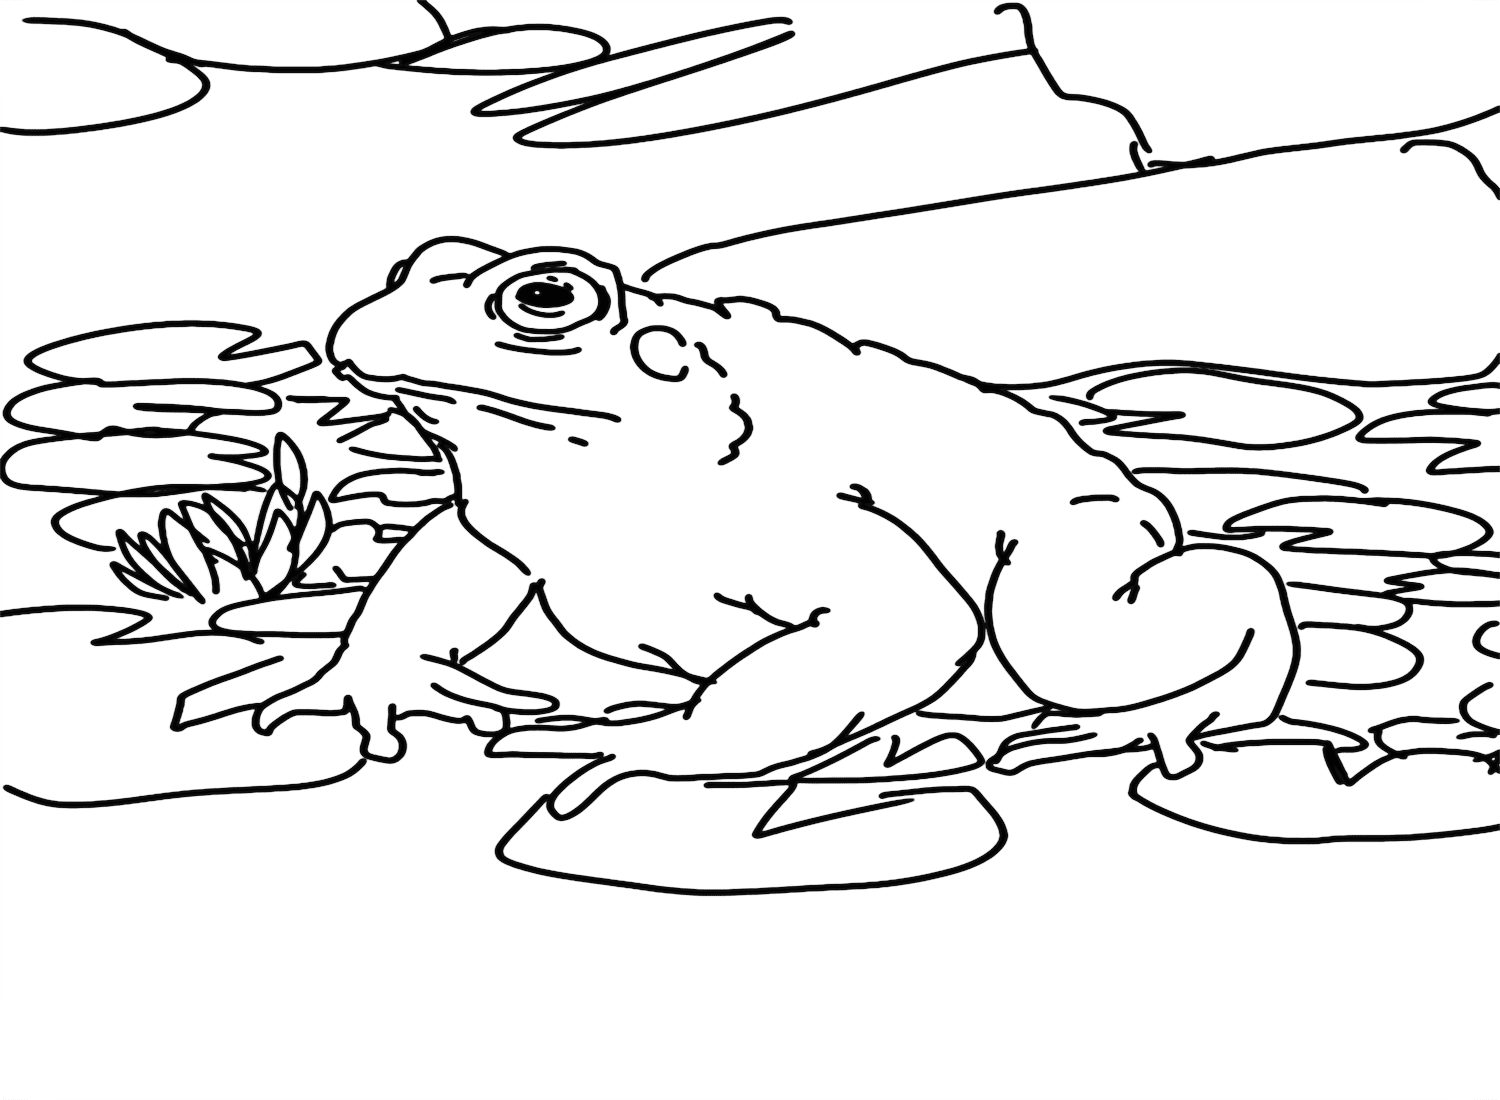 Cane Toad Coloring Page PDF from Cane Toad